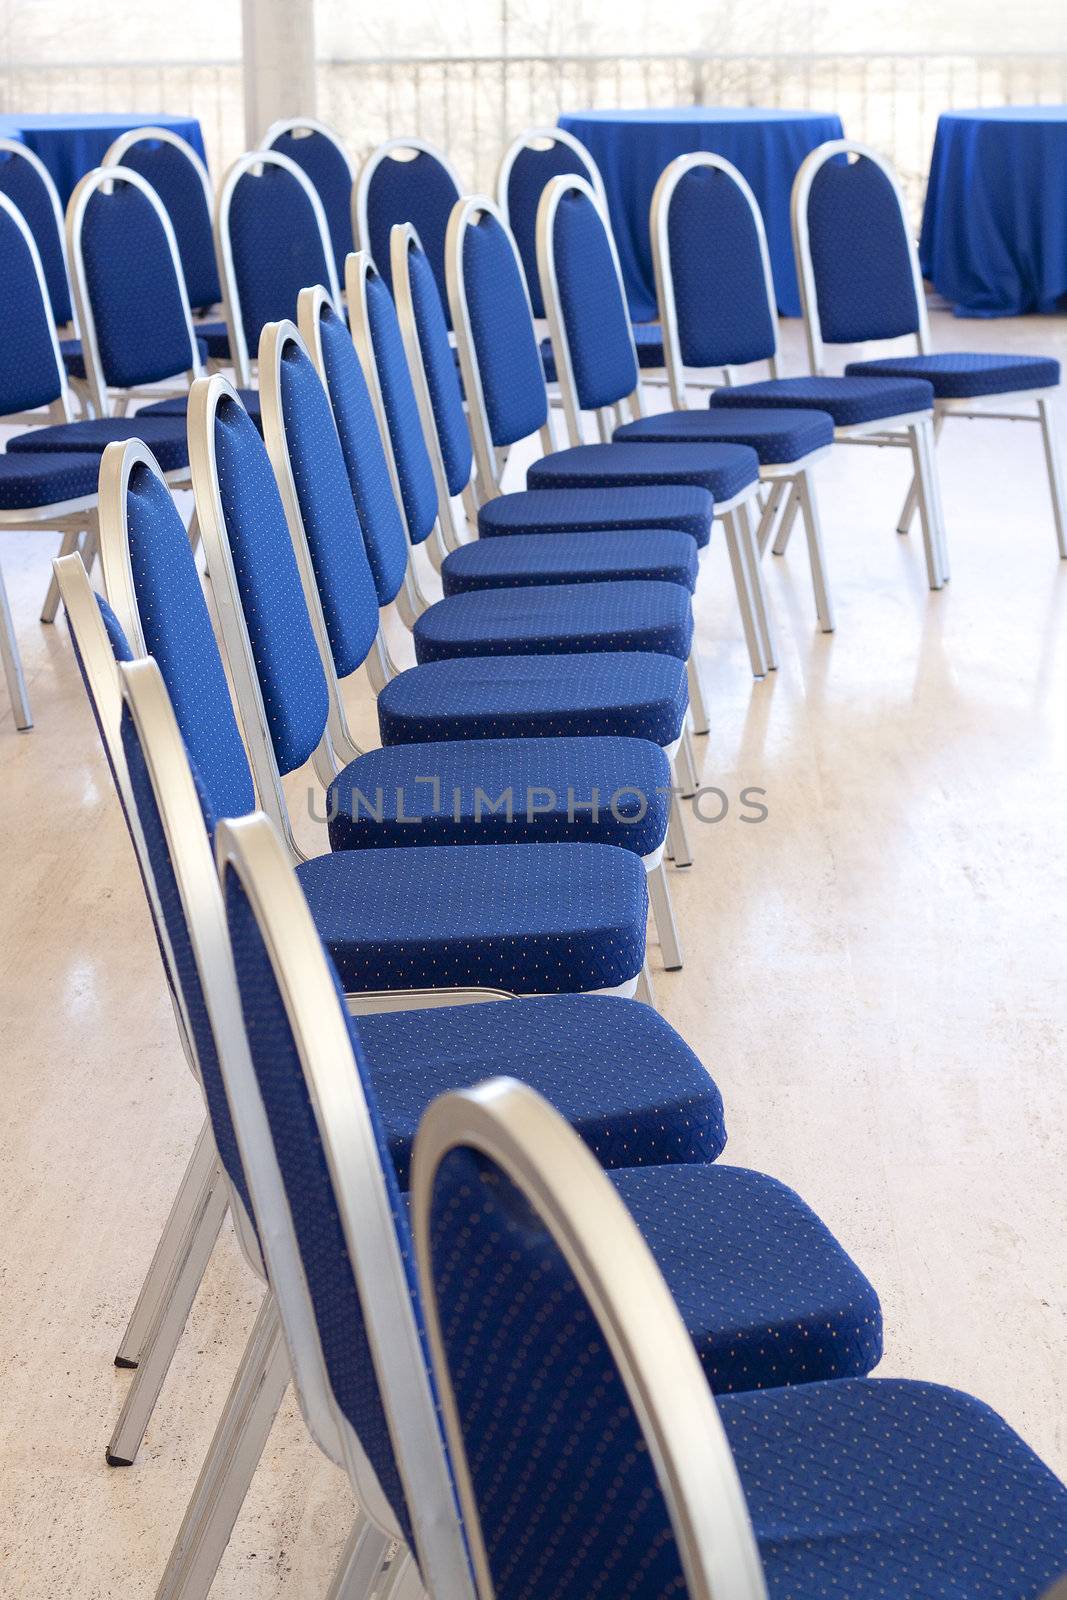 Conference chair by annems